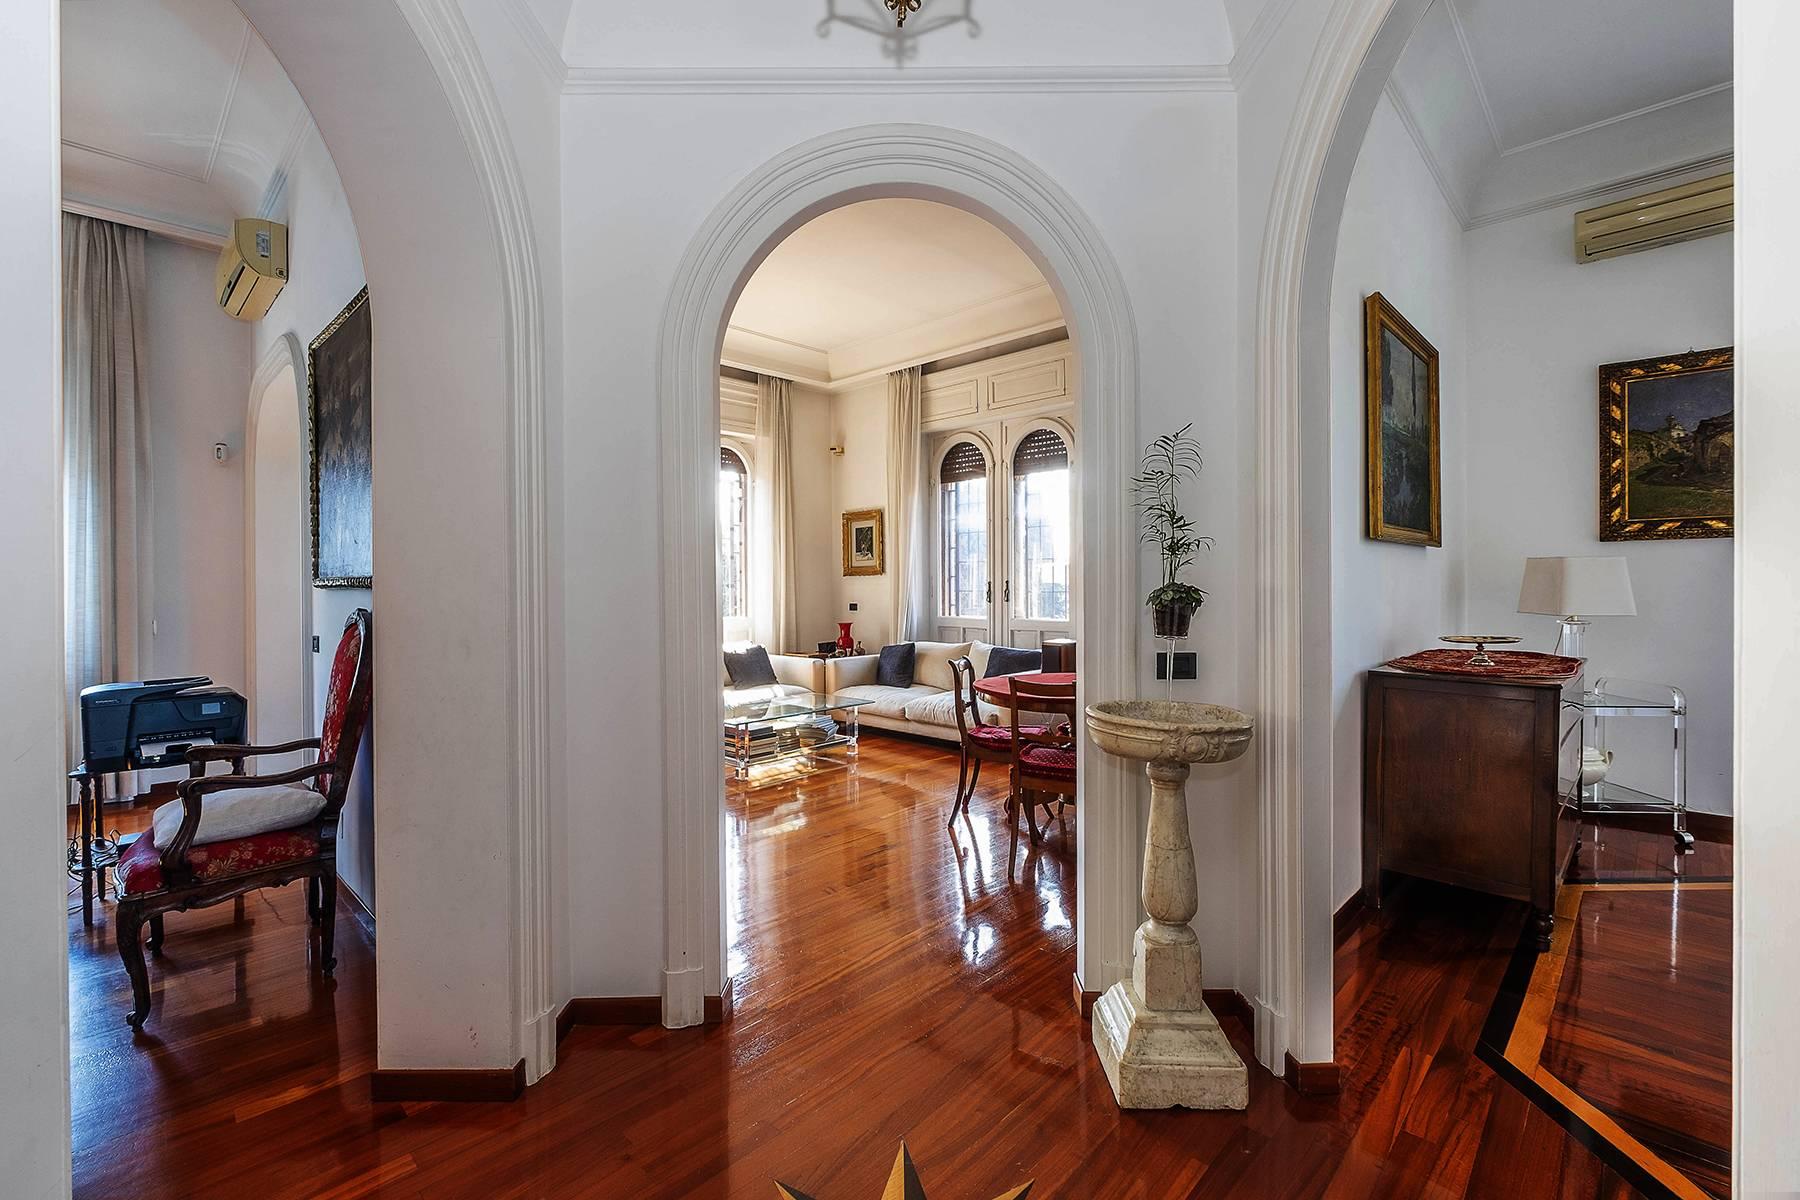 Superb penthouse located in an elegant Coppedè-style building - 16